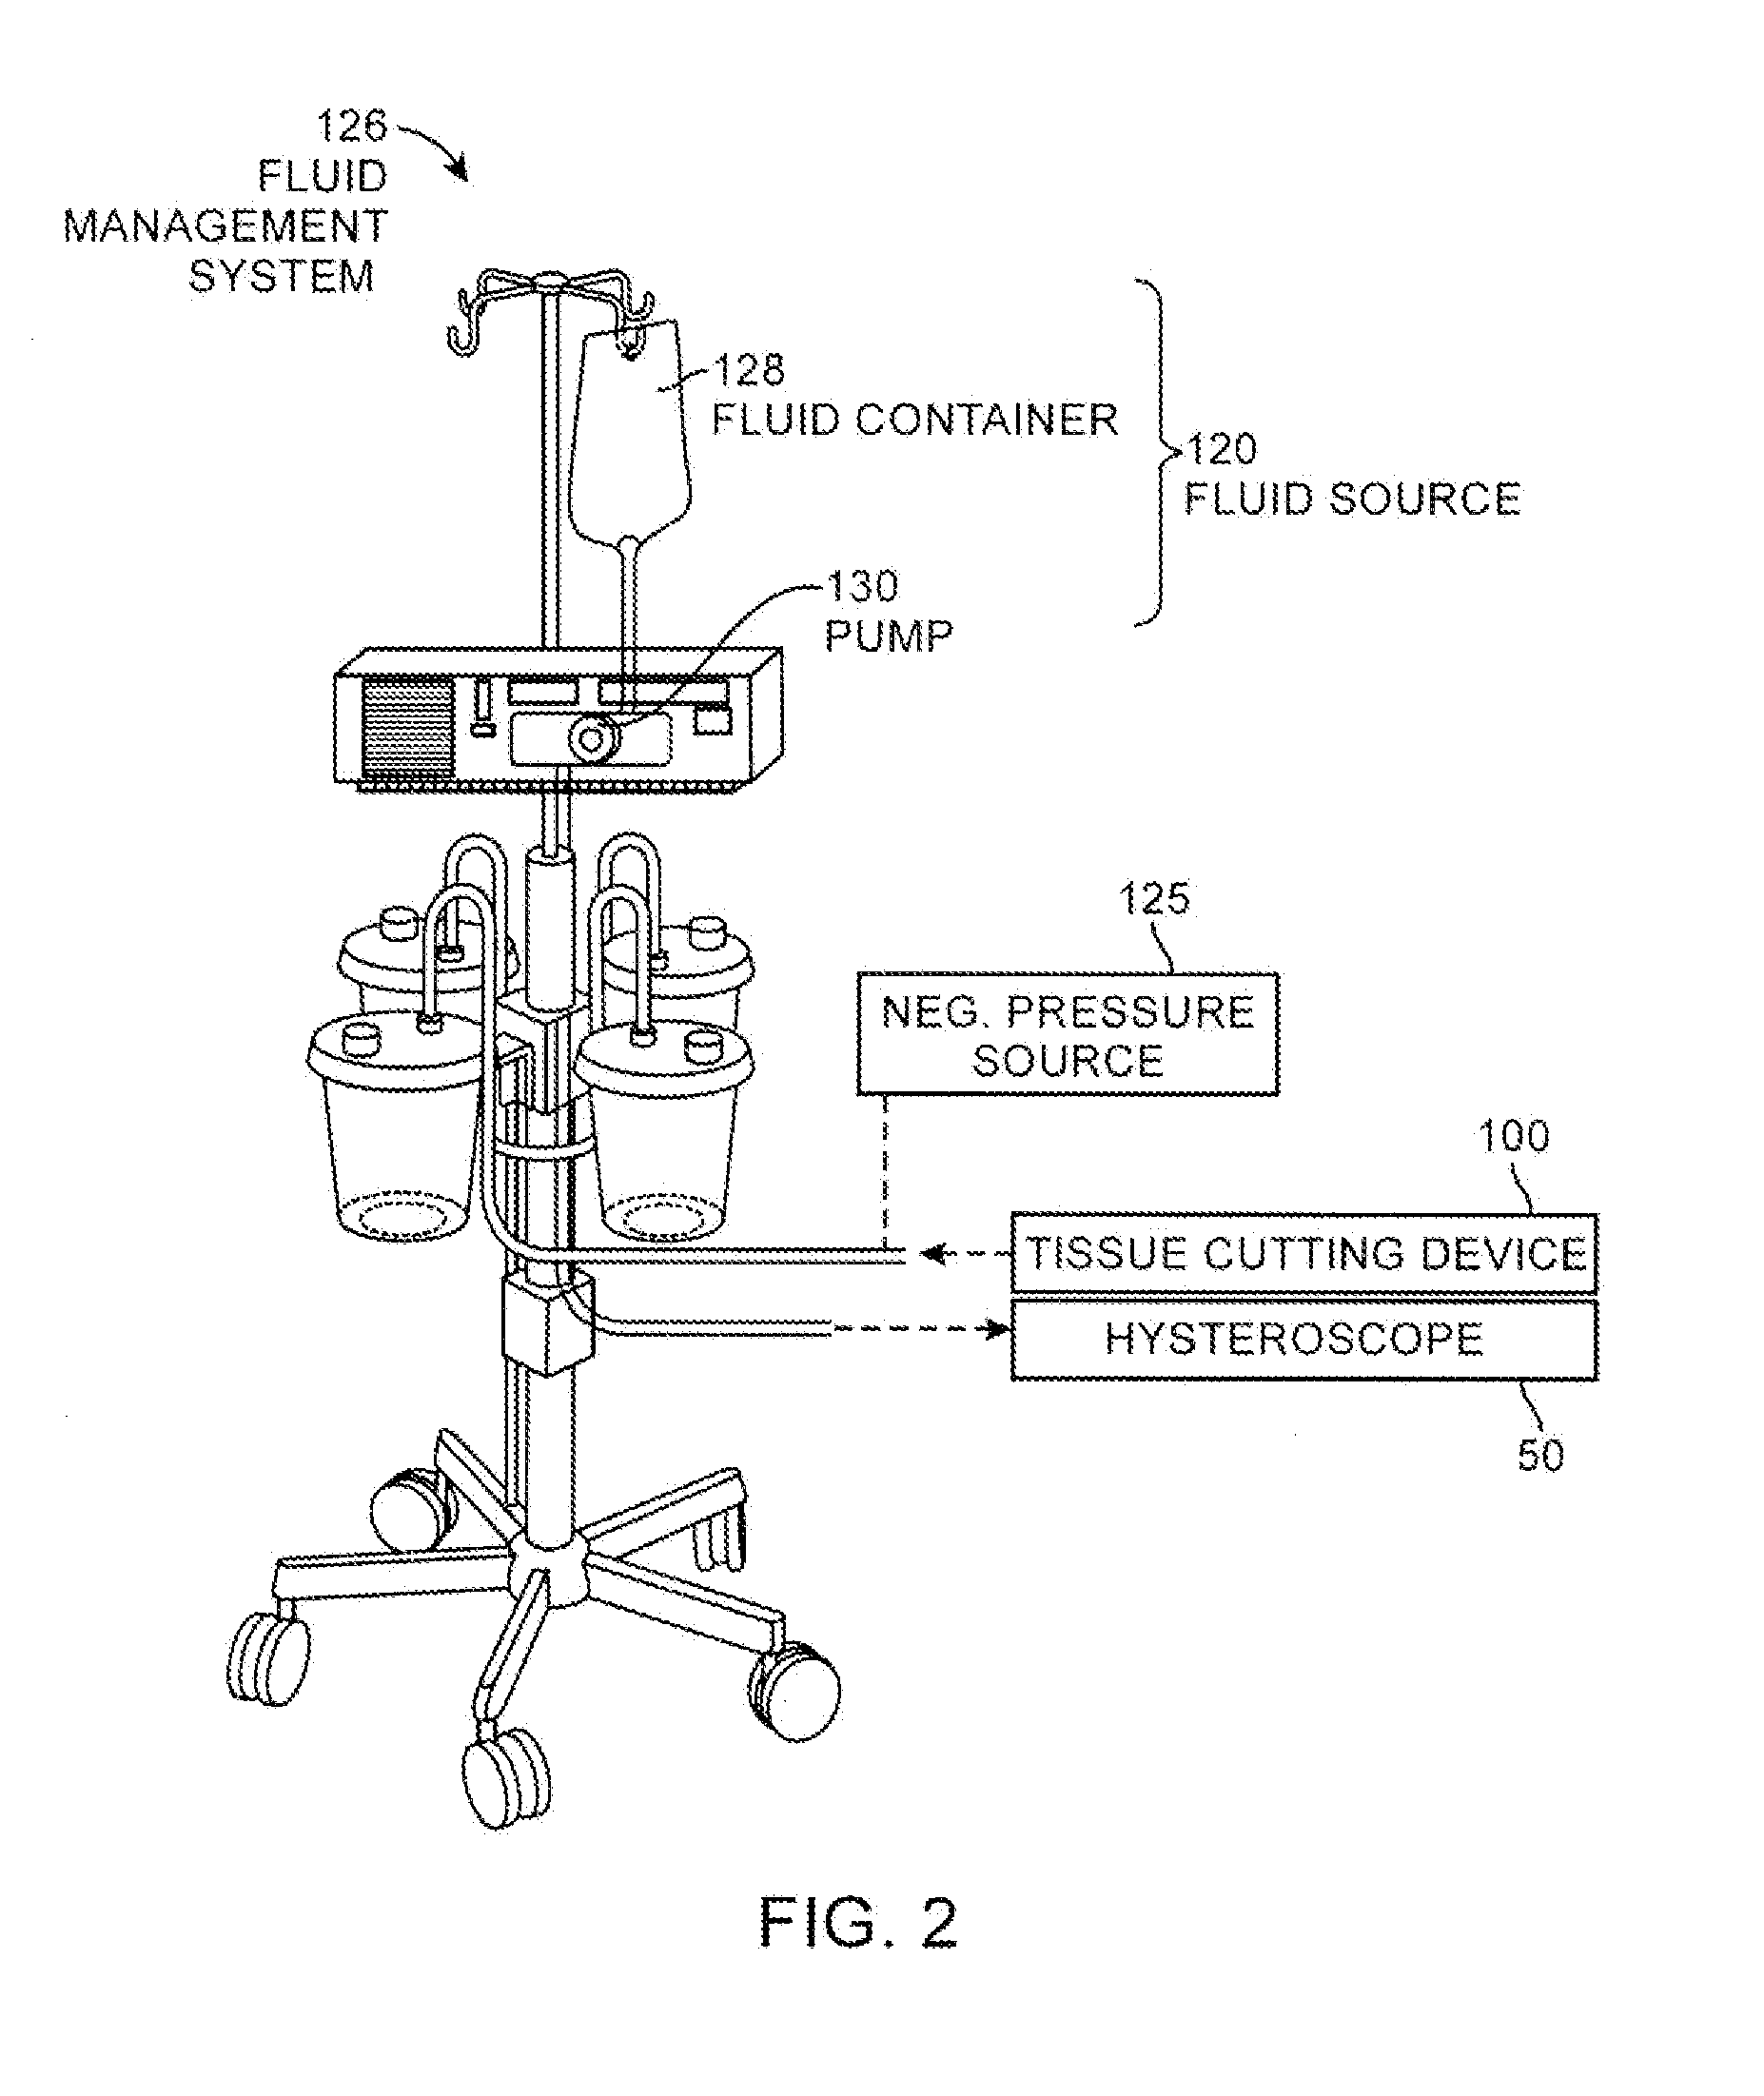 Tissue resecting systems and methods